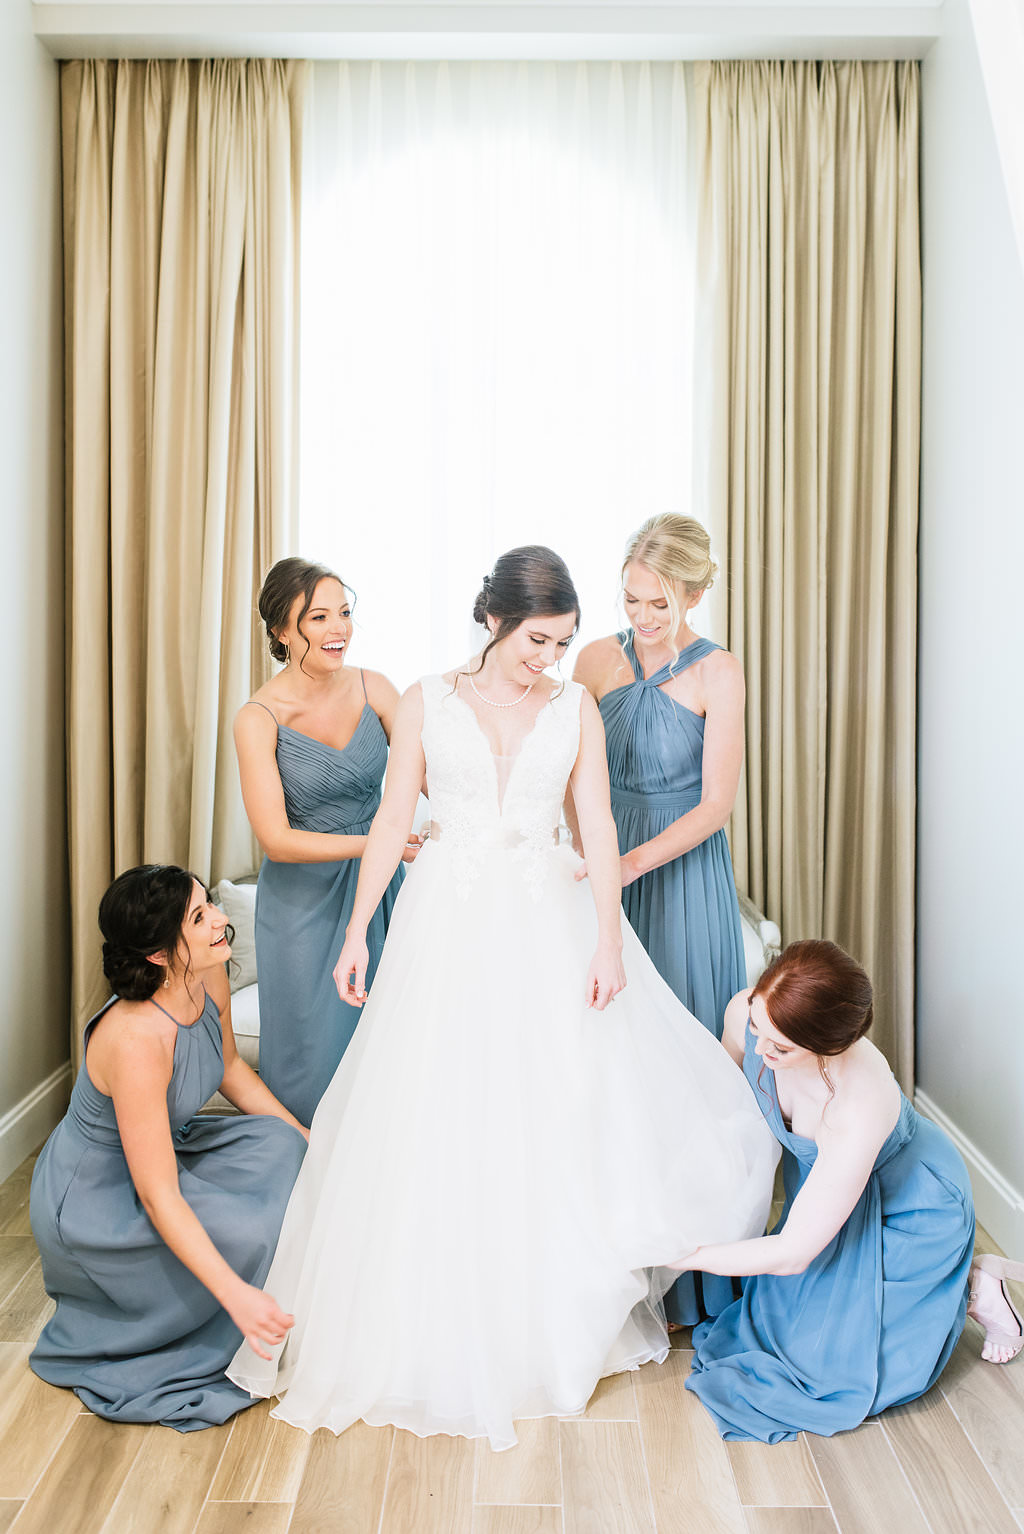 Florida Bride and Bridesmaids Getting Ready Wedding Portrait, Bridesmaids in Dusty Blue, Slate Blue Long Mismatched Style Dresses, Bride in Tank Top Strap Deep V-Neckline Ball Gown Wedding Dress with Satin Belt | Tampa Bay Hair and Makeup Artist Michele Renee the Studio